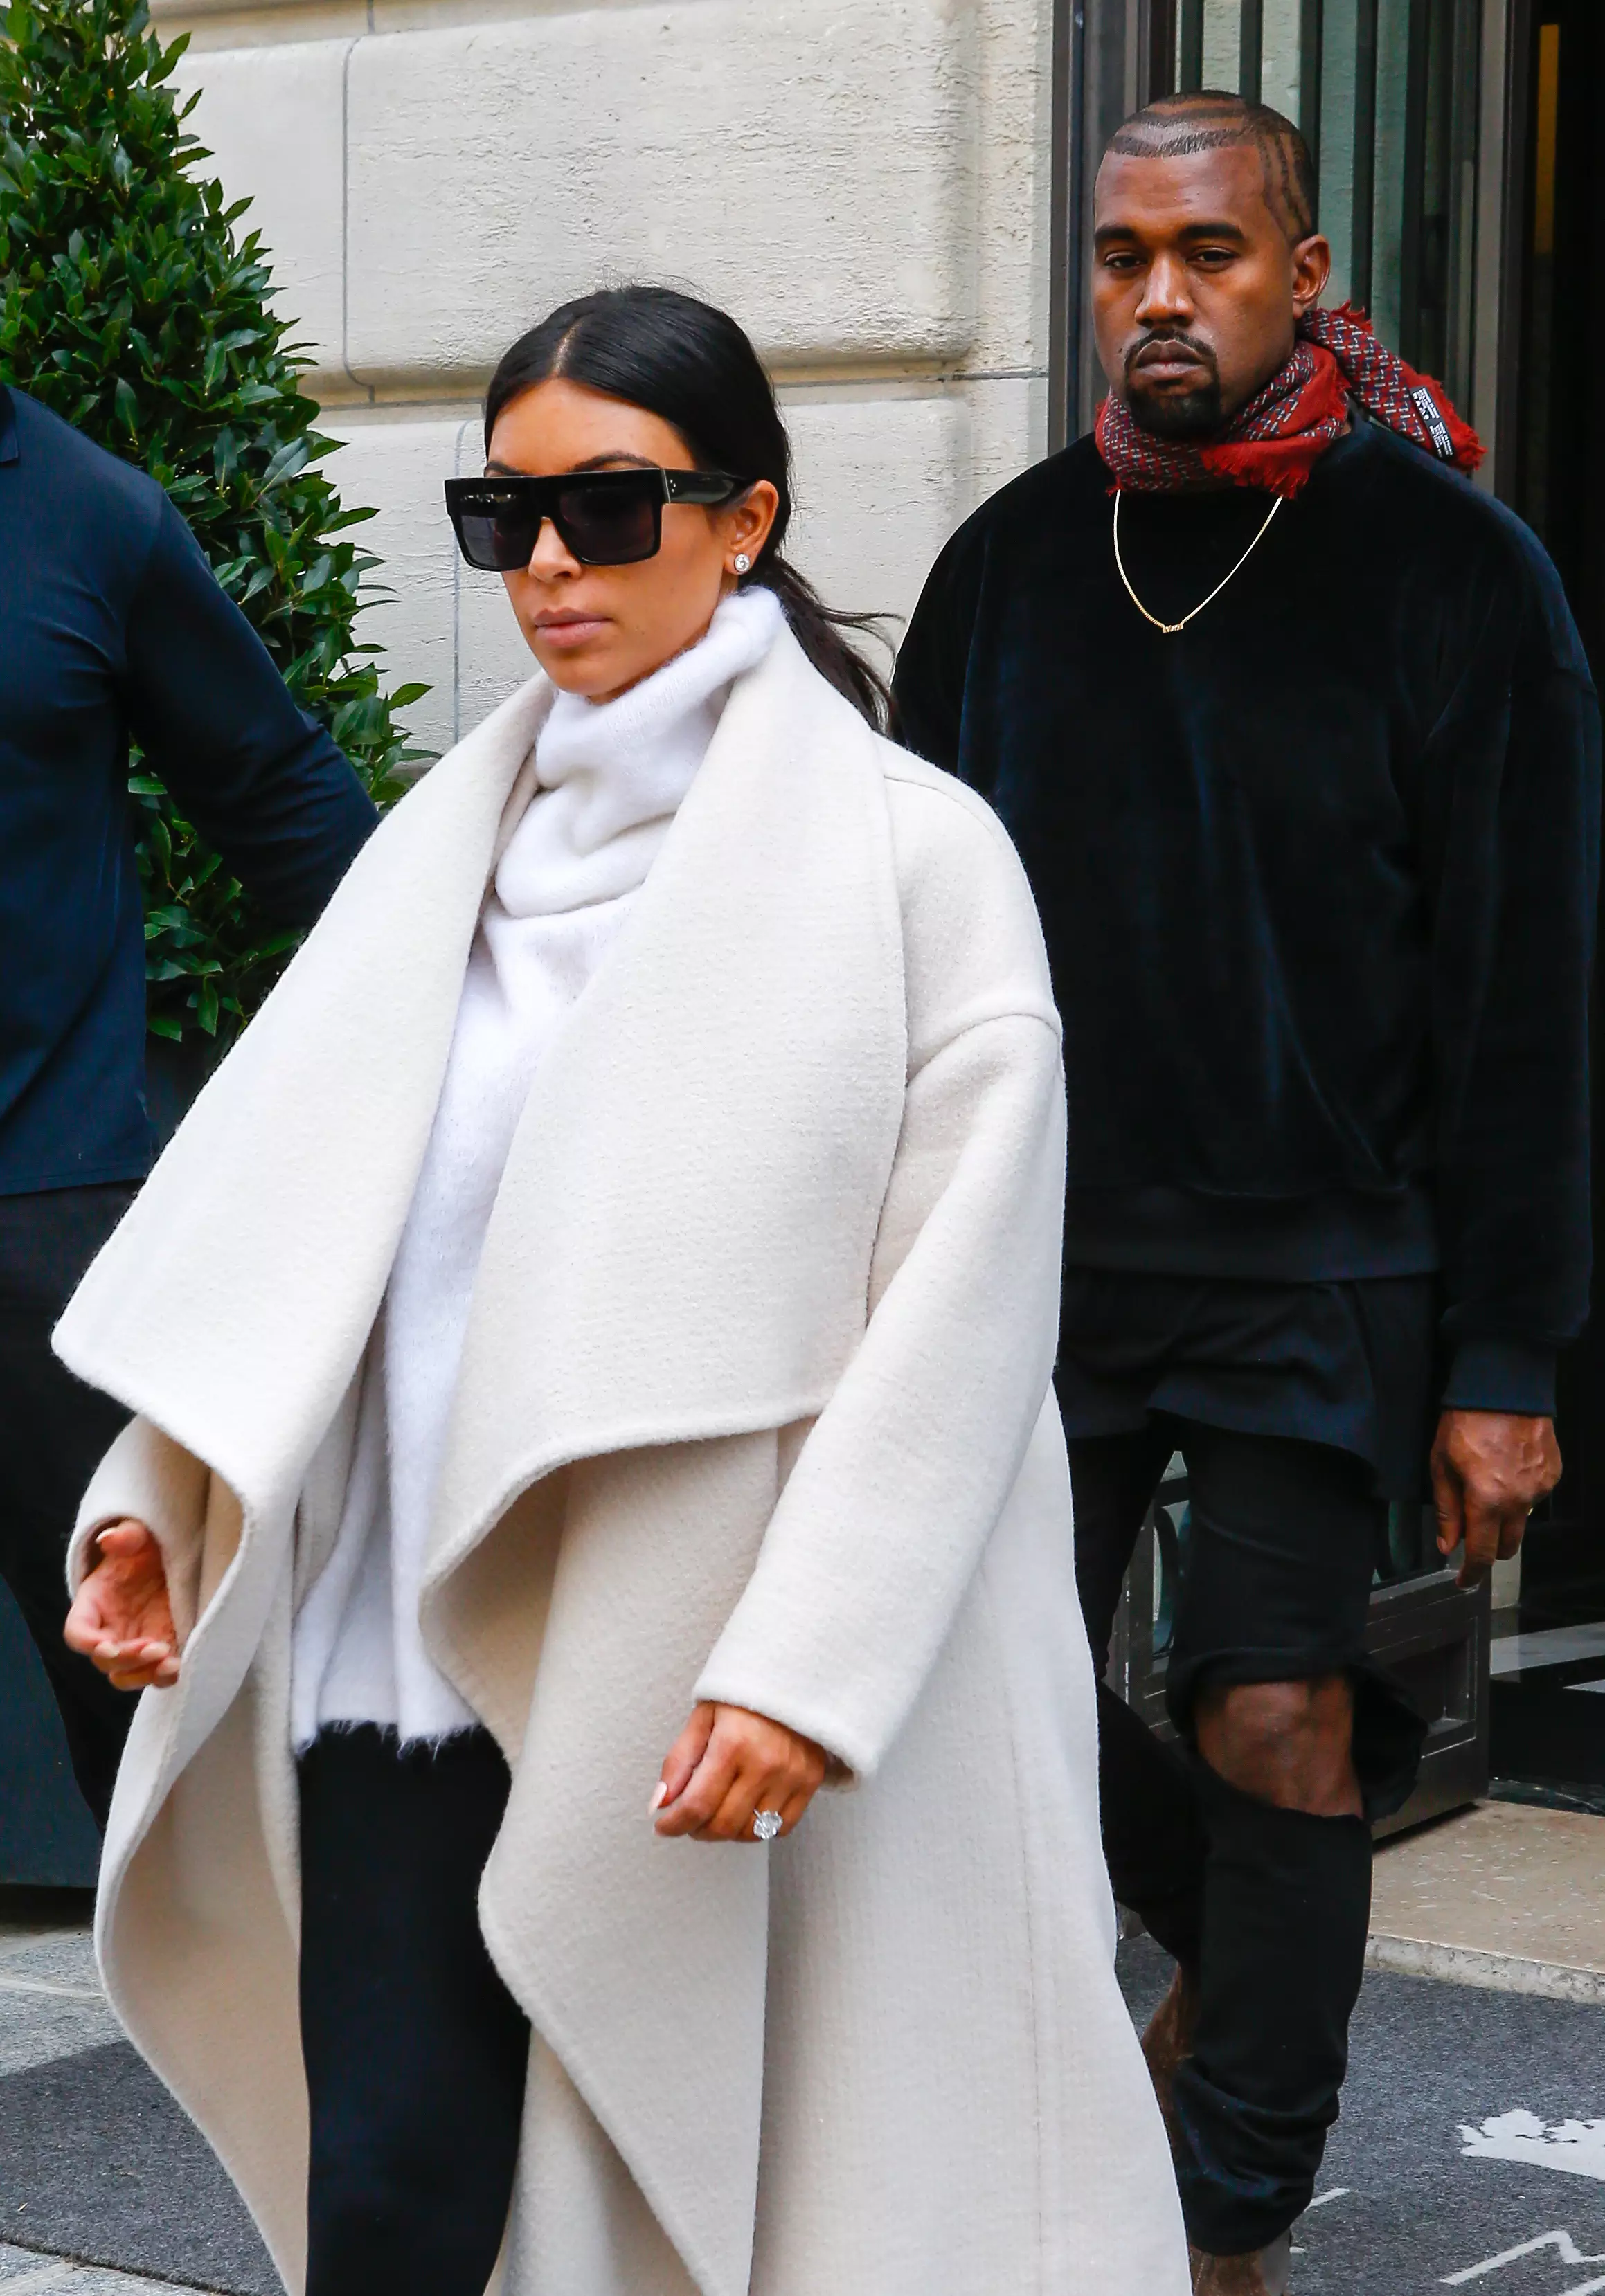 Kanye West's new track claims that Kim Kardashian is still in love with him.